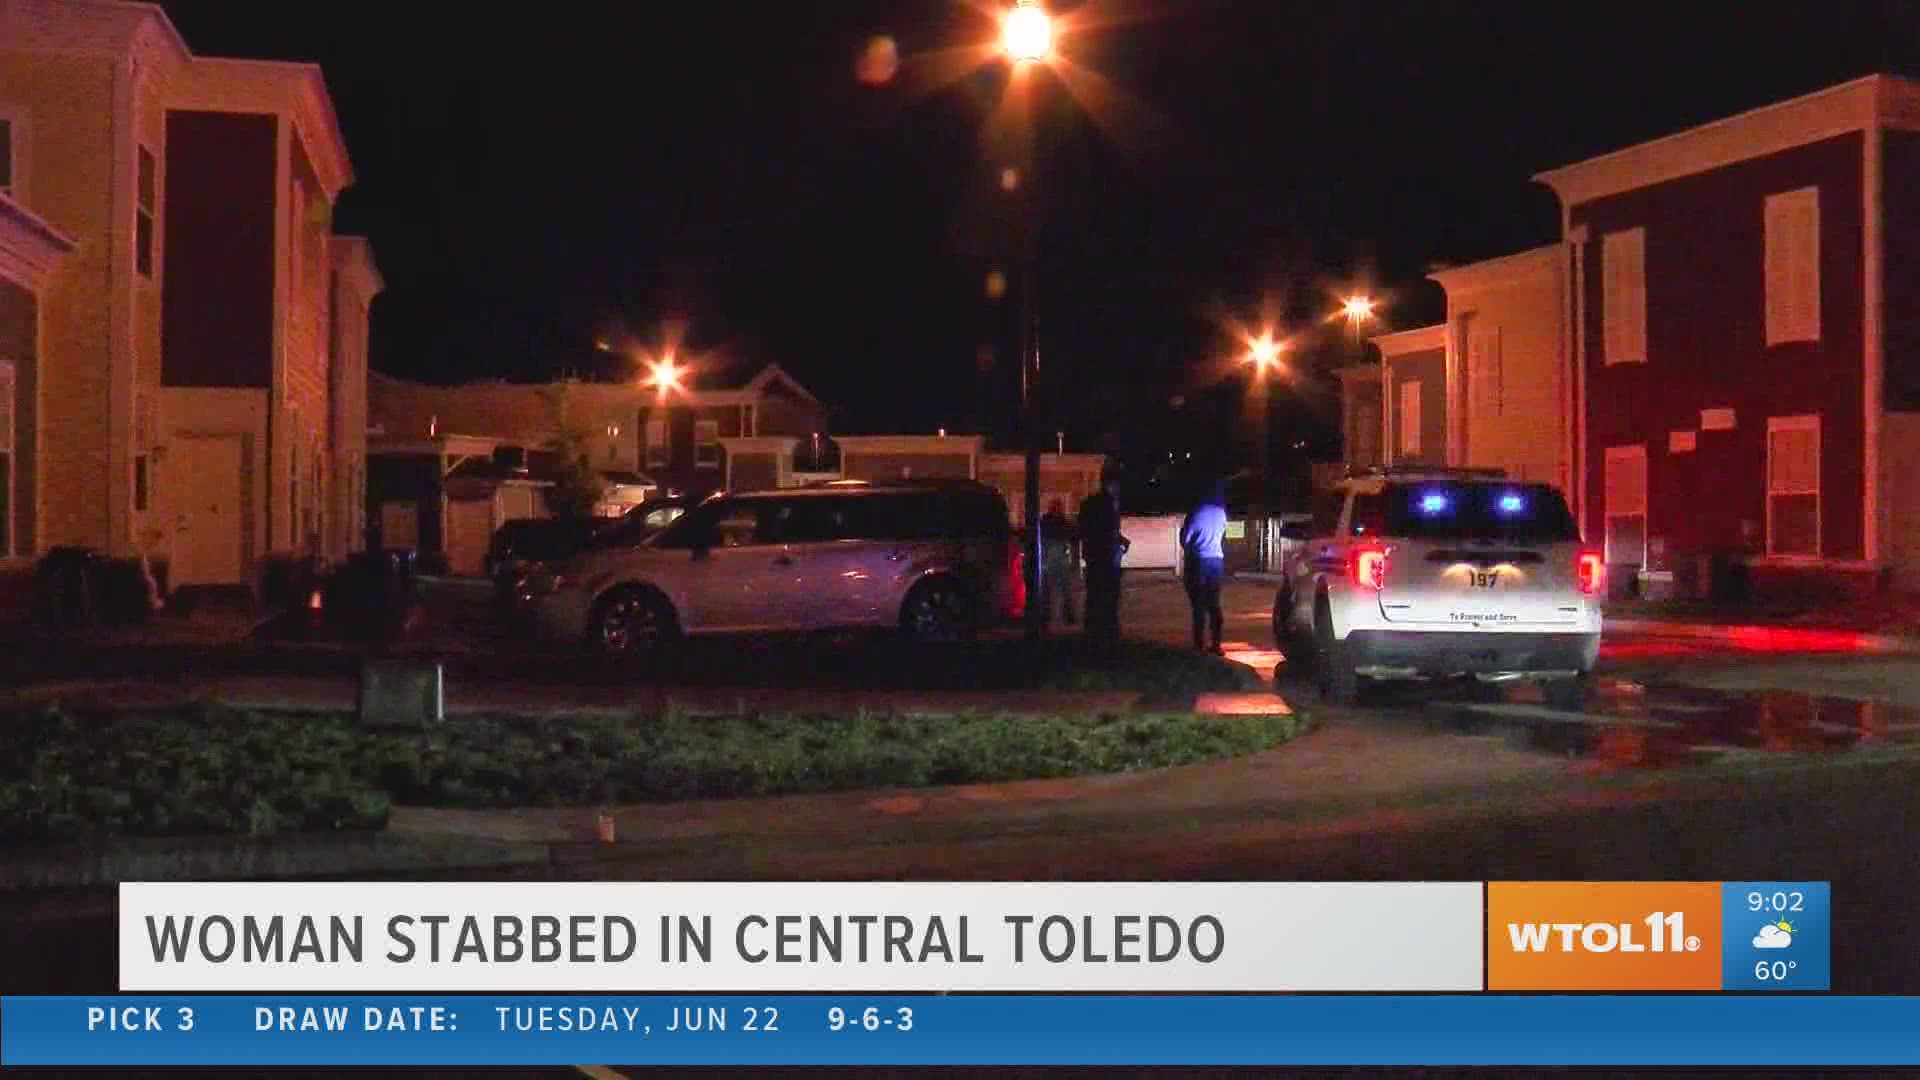 Police say three people were fighting when the victim was stabbed.